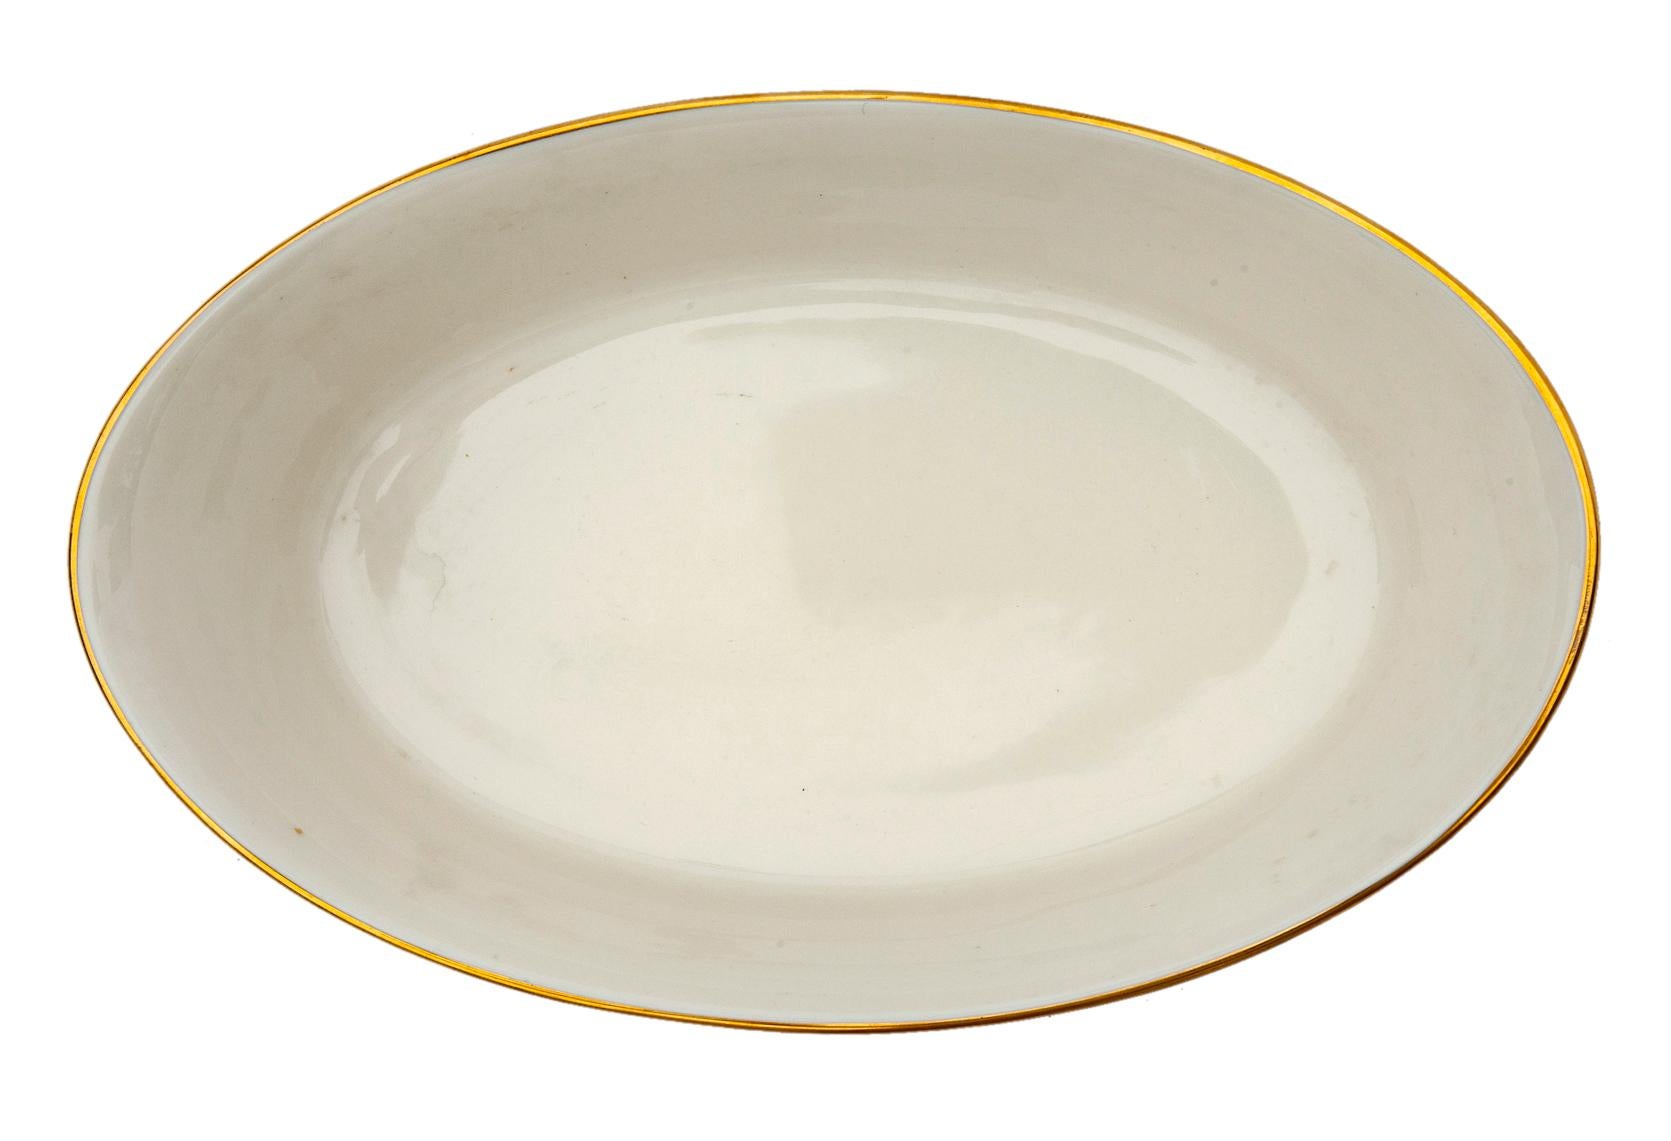 Classic Lenox deep oval server in the 